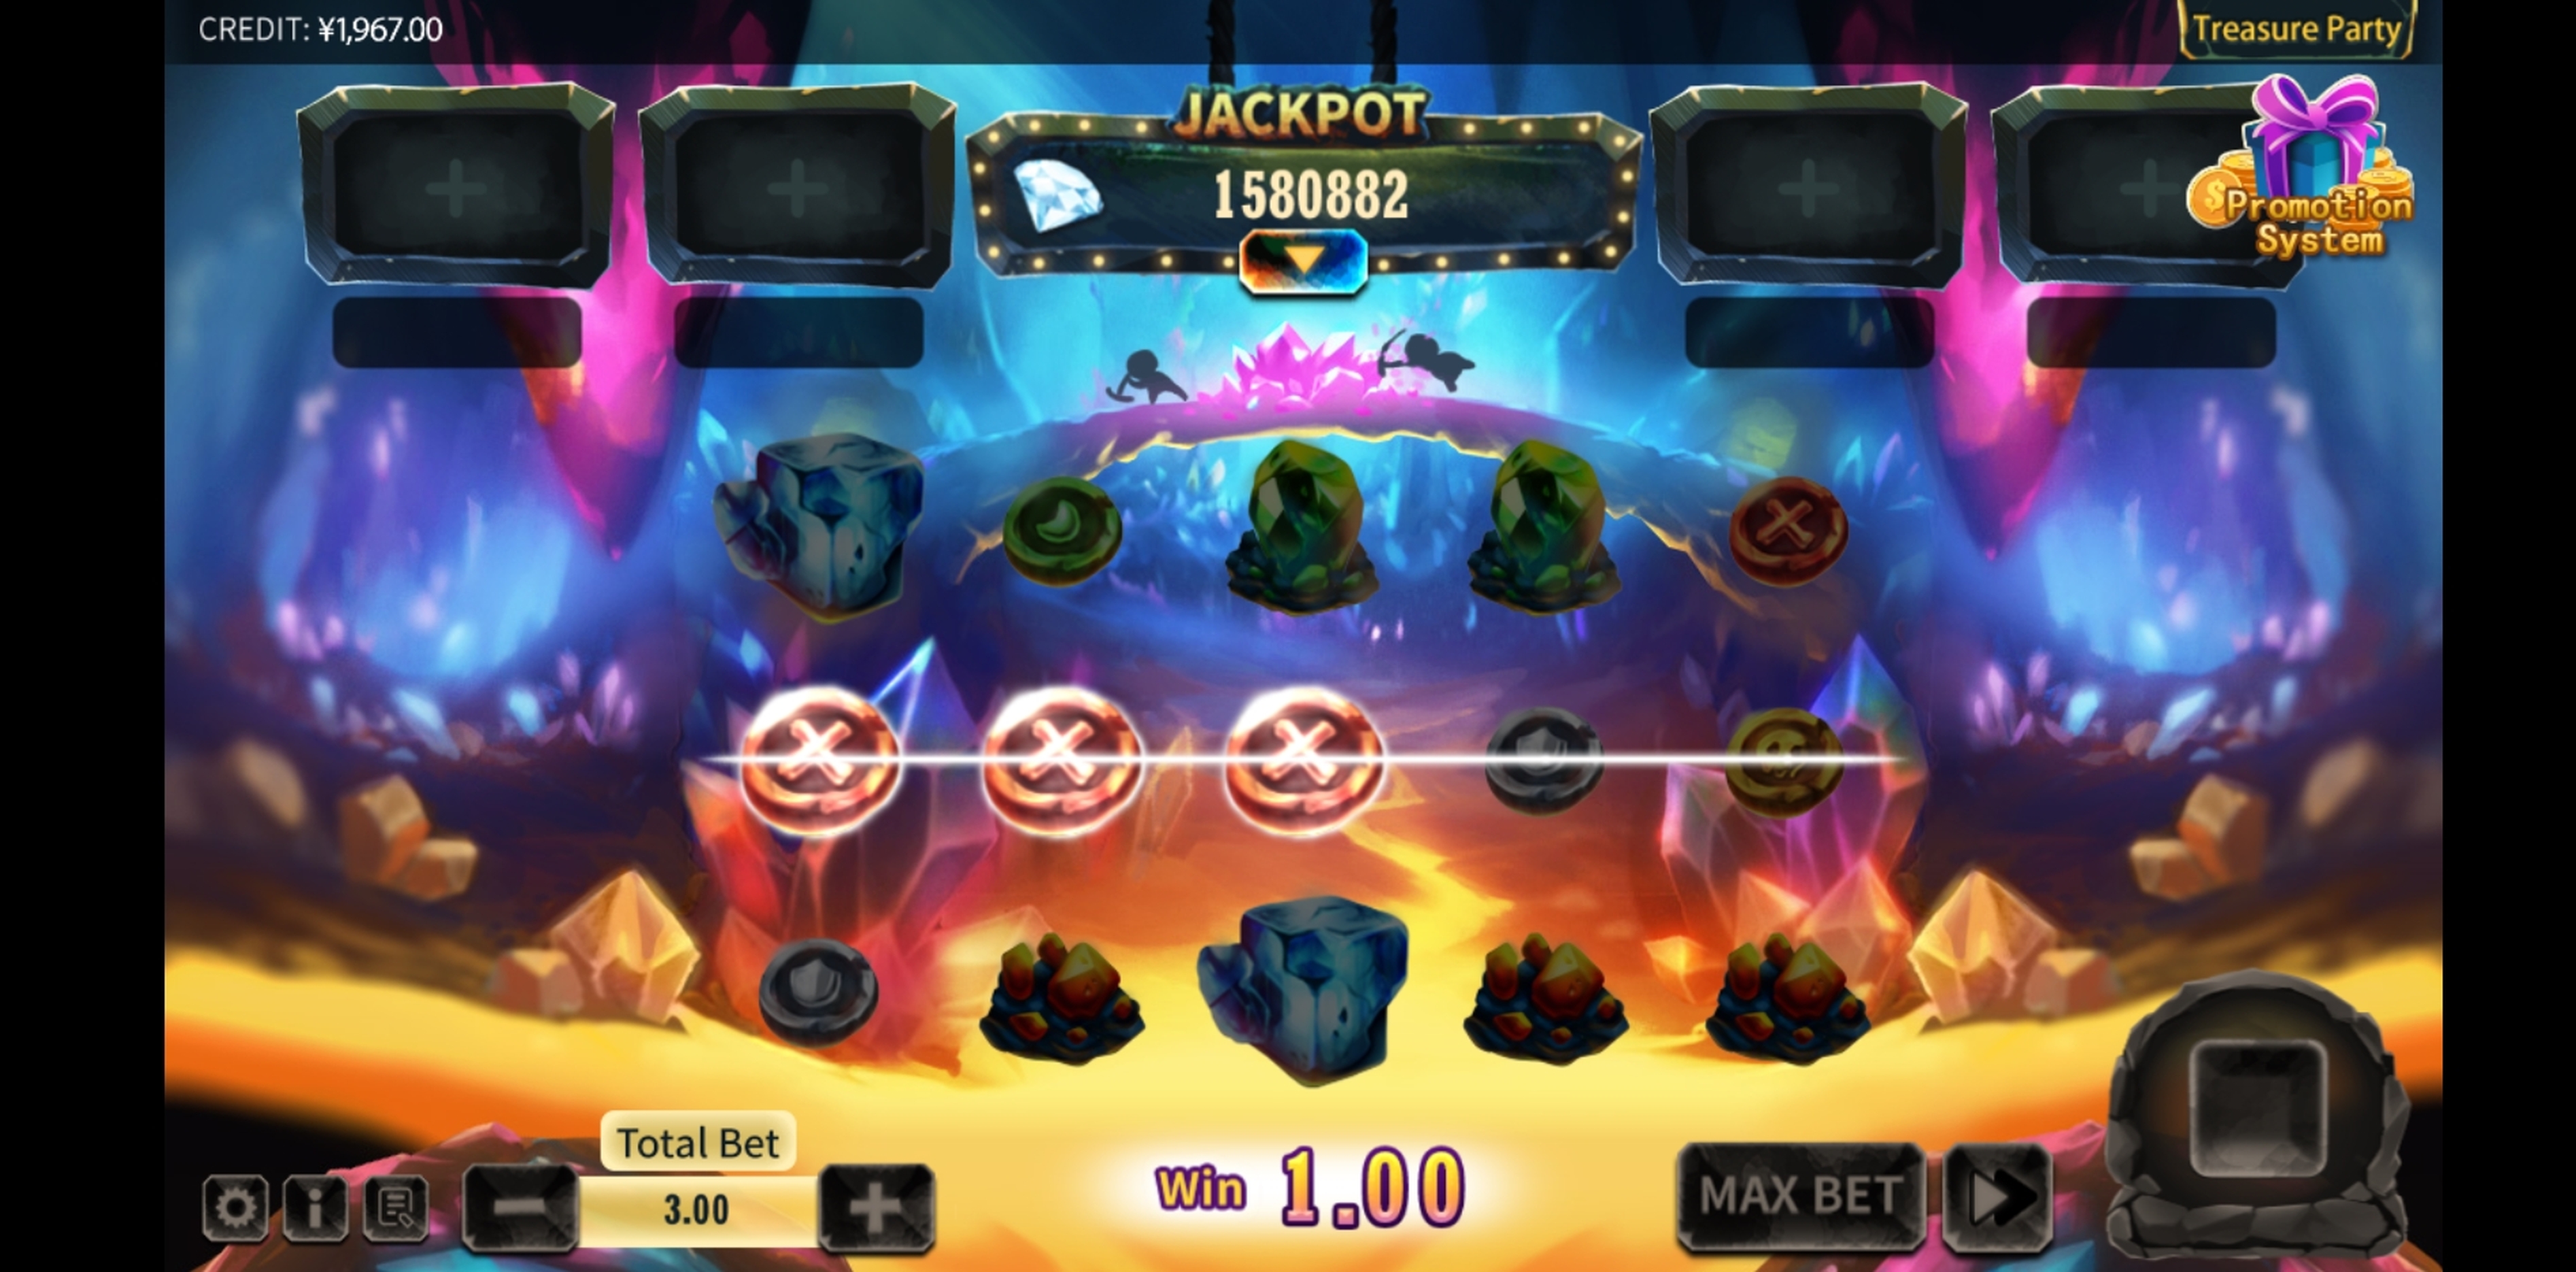 Win Money in Treasure Jackpot Party Free Slot Game by XIN Gaming